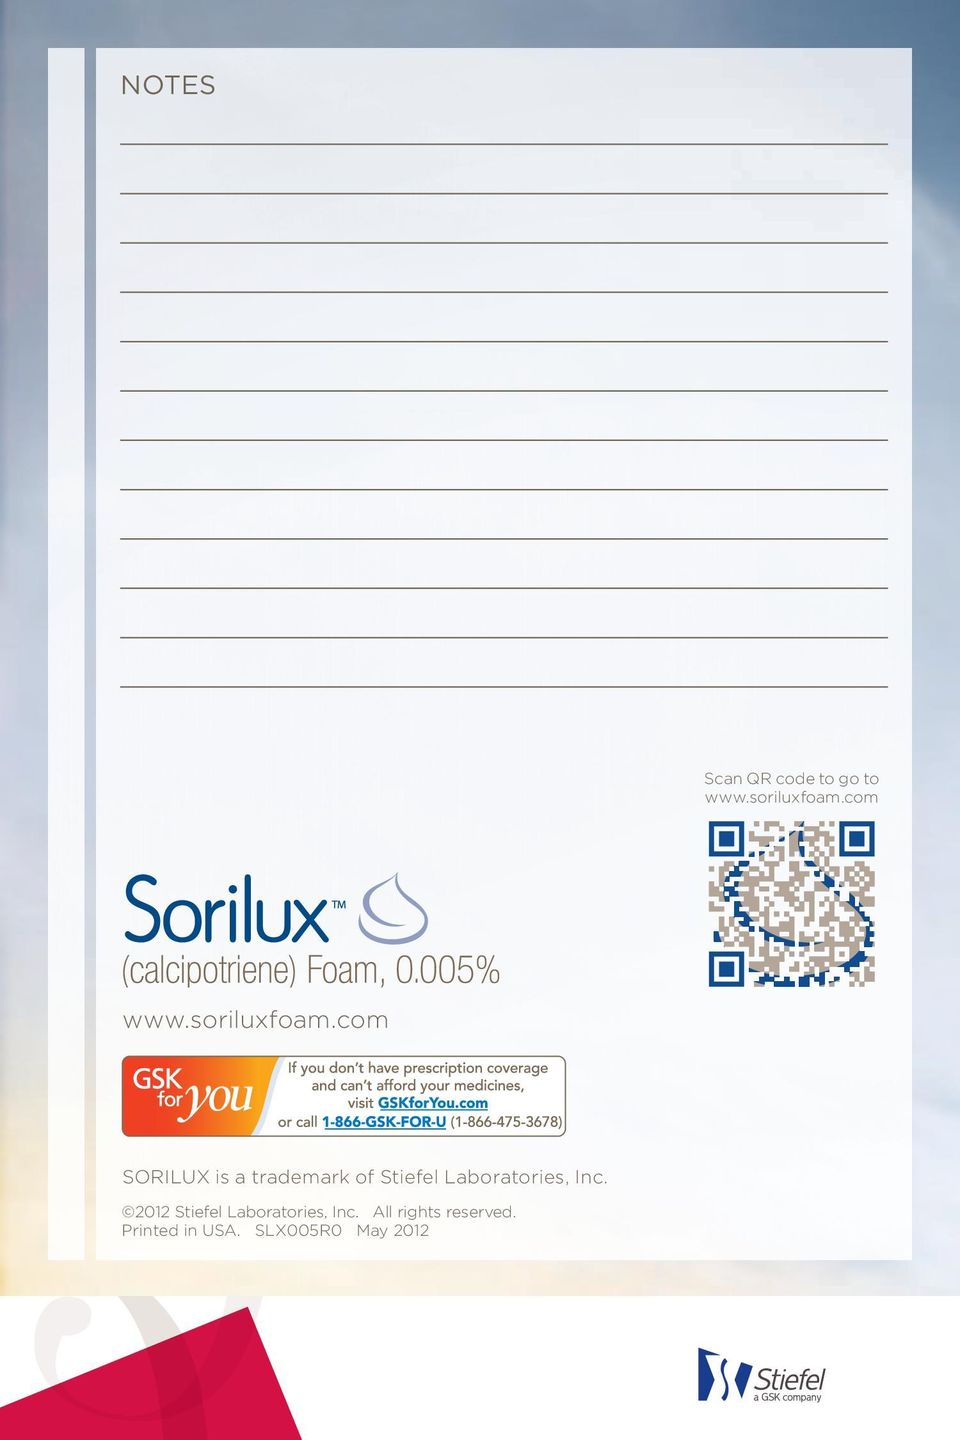 com SORILUX is a trademark of Stiefel Laboratories,